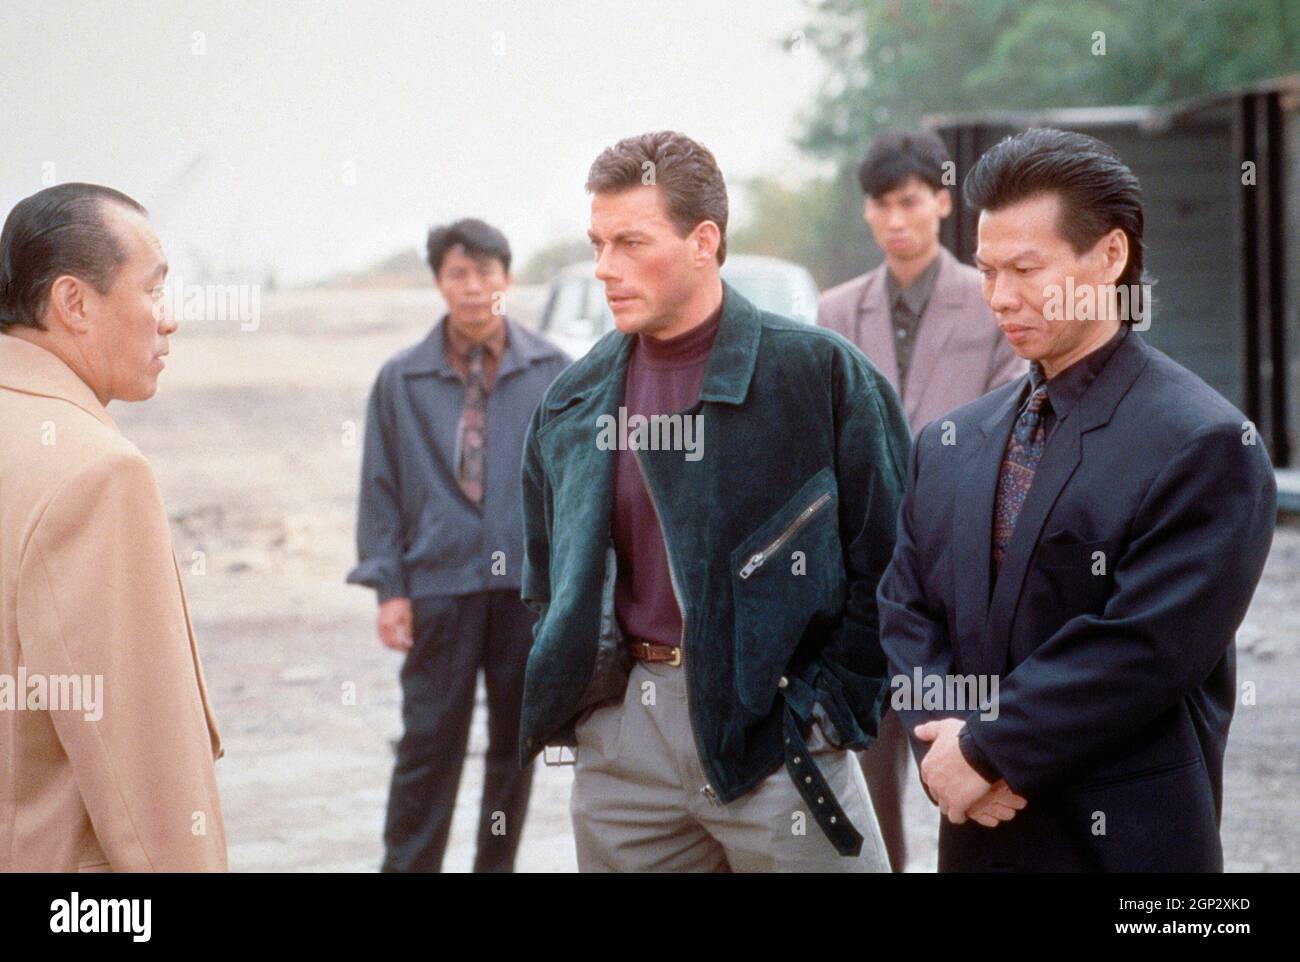 DOUBLE IMPACT, foreground, from left: Philip Chan, Jean-Claude Van Damme, Bolo  Yeung, 1991. ph: © Columbia Pictures / courtesy Everett Collection Stock  Photo - Alamy